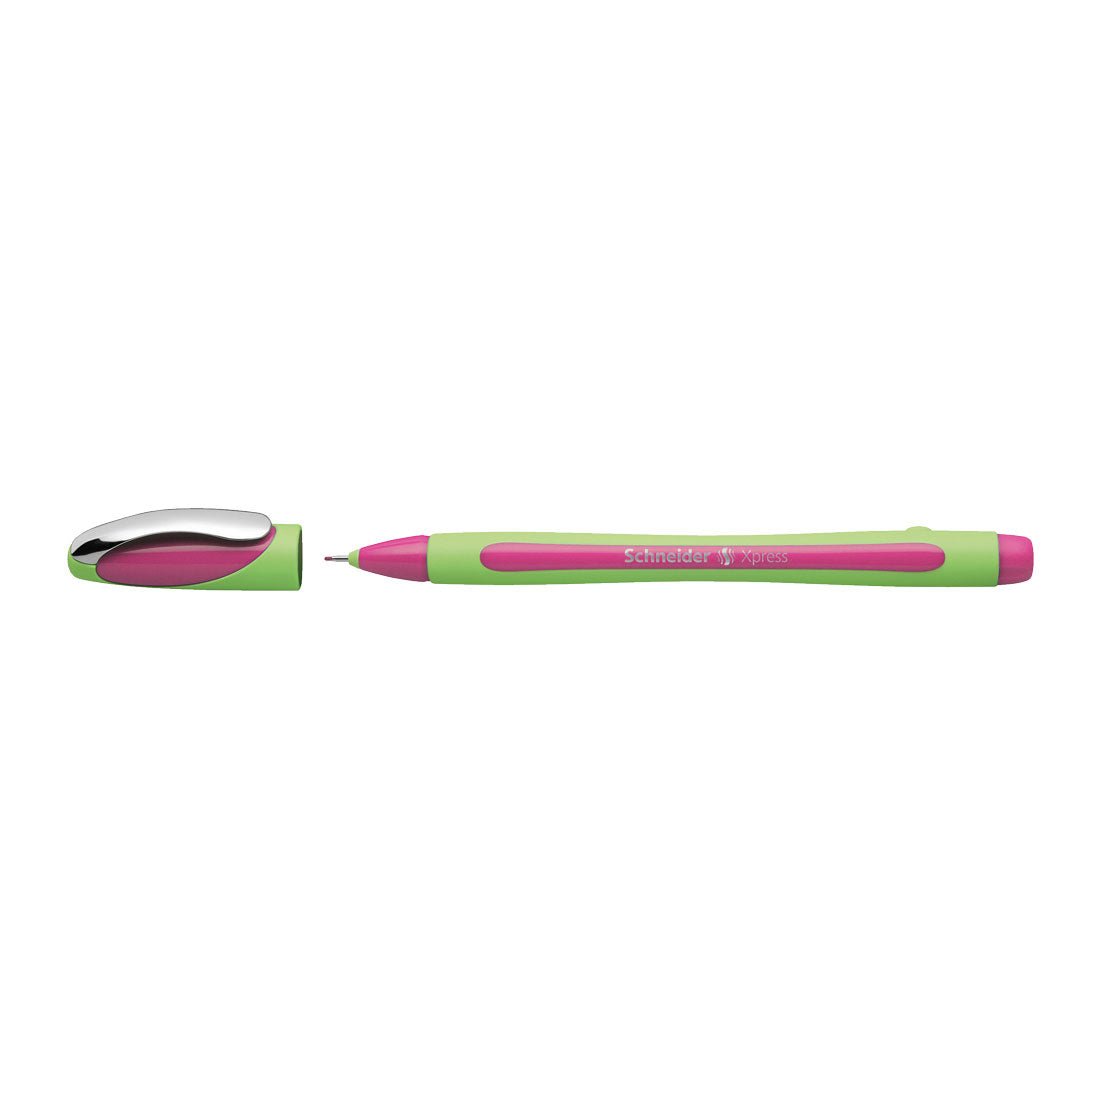 Xpress Fineliners 0.8mm, Box of 10#ink-color_pink